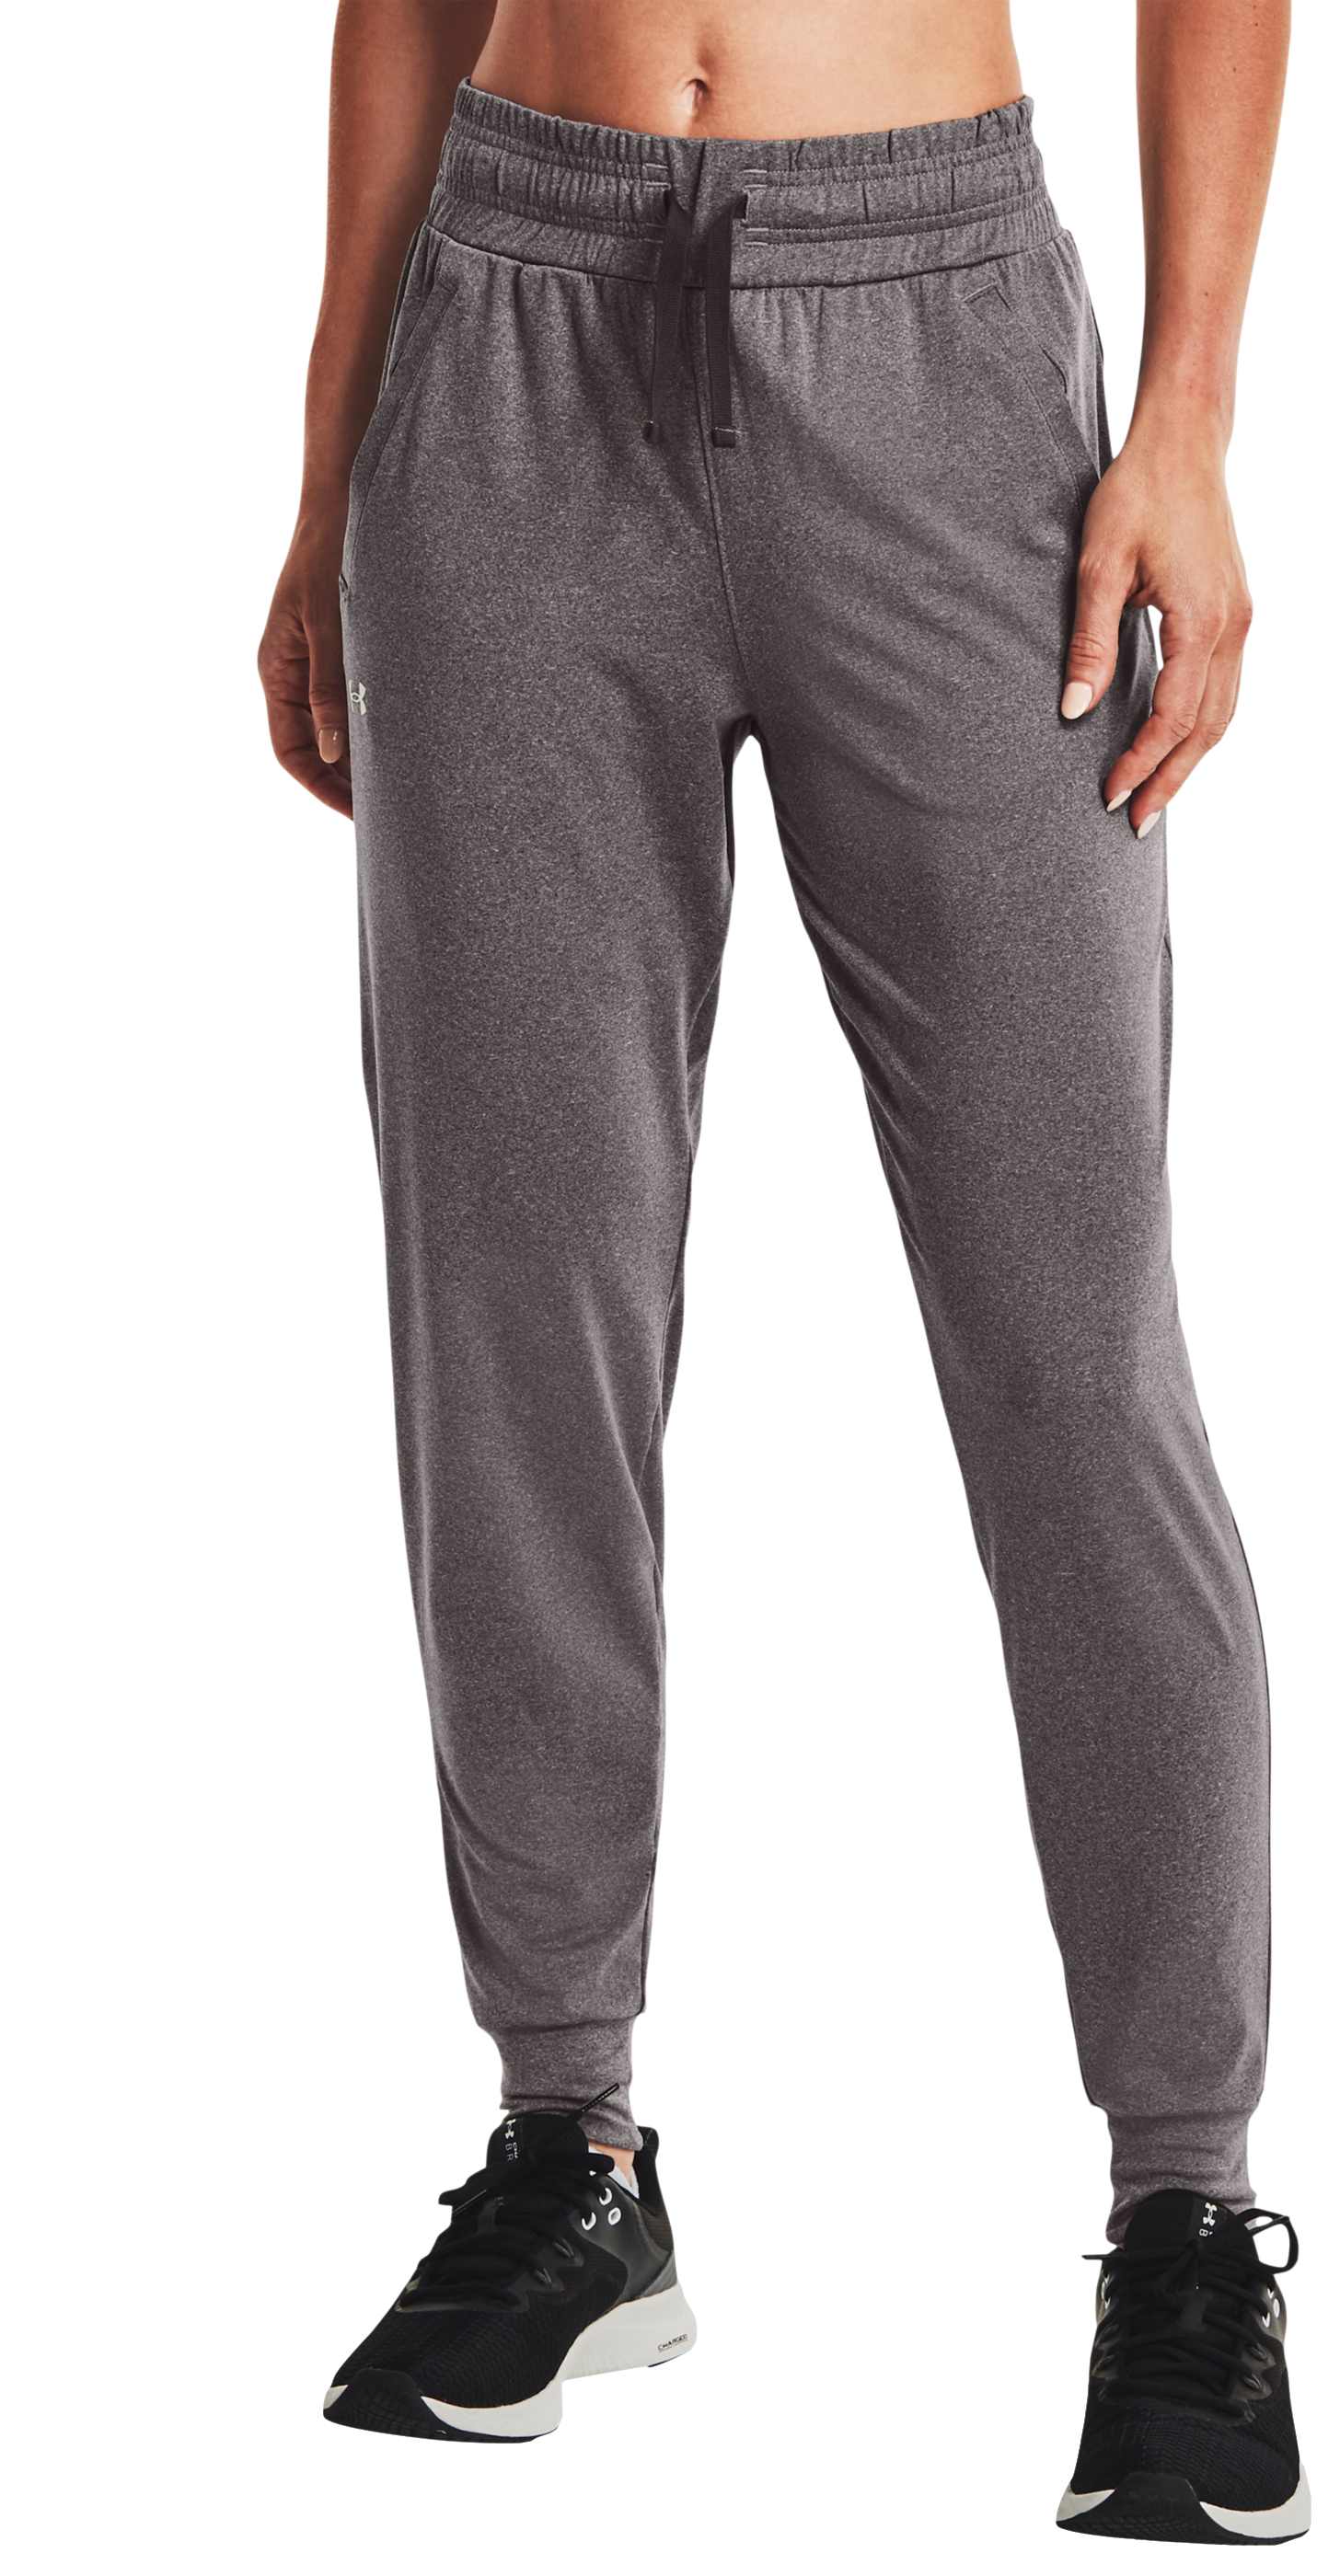 Under Armour HeatGear Armour Pants for Ladies - Charcoal Light Heather/White - XXL - Short